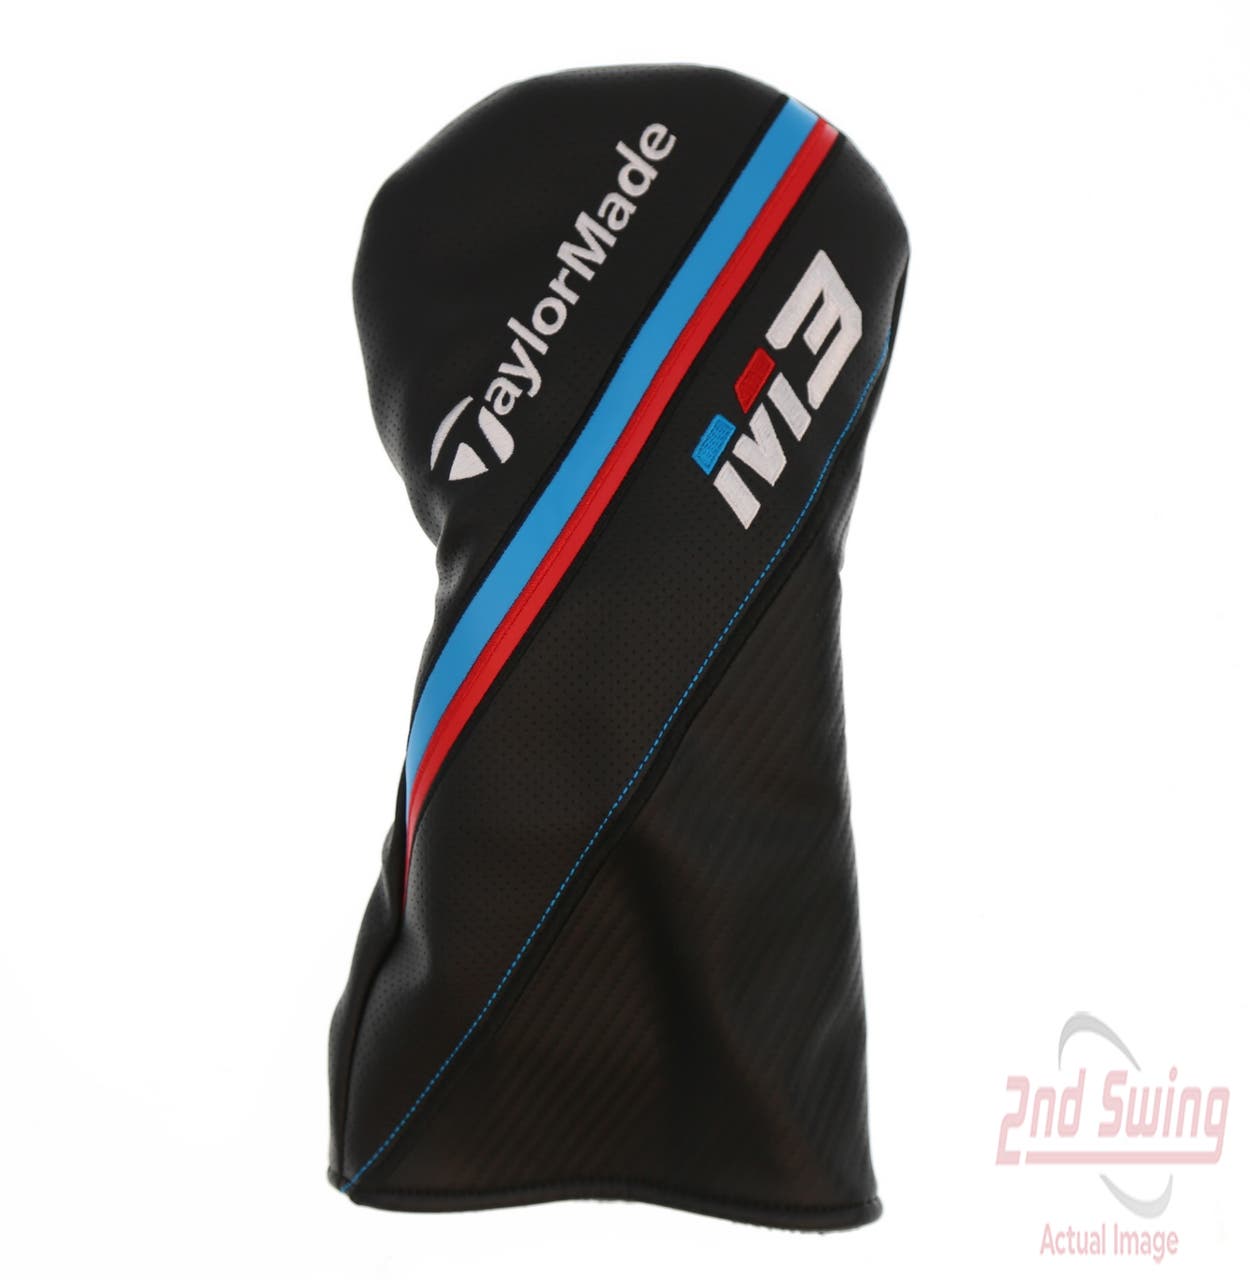 TaylorMade 2018 M3 Driver Headcover Black/Red/Blue